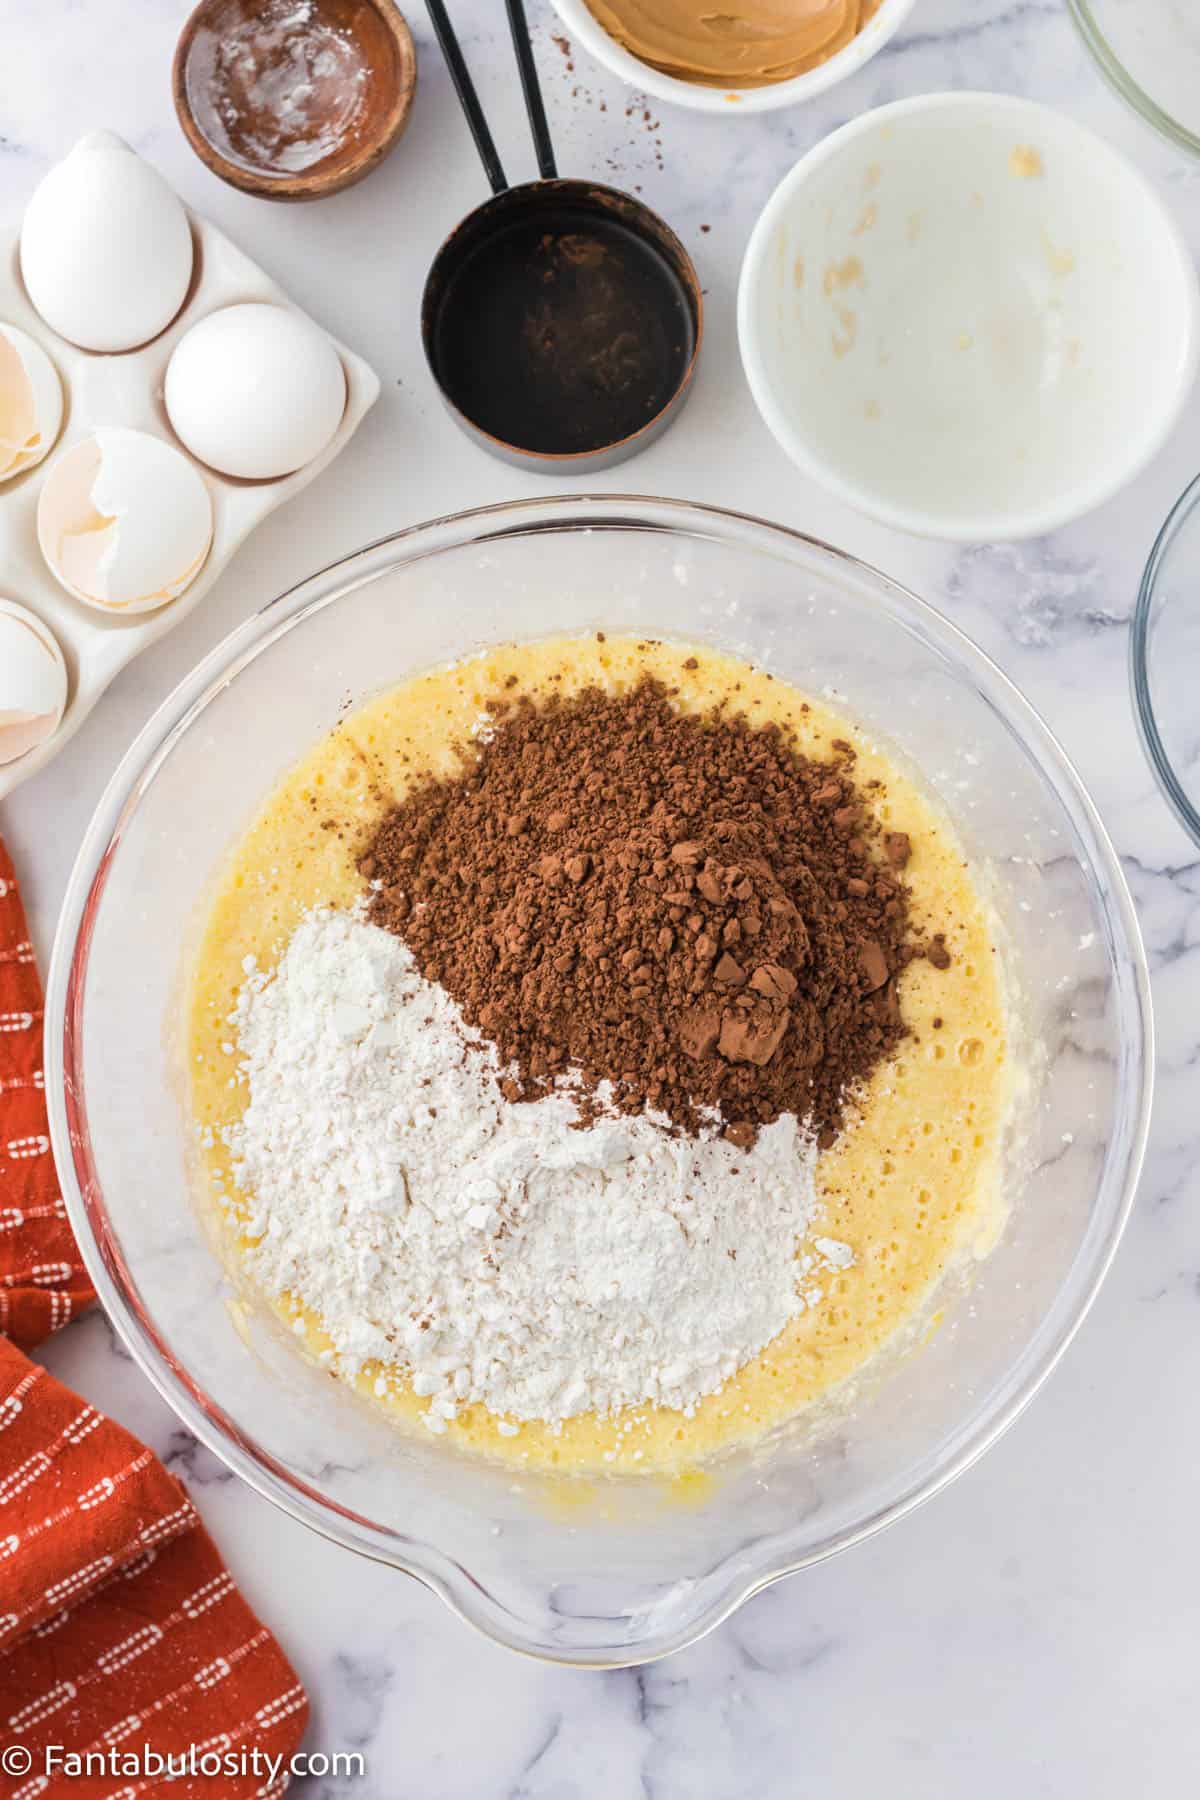 Flour and cocoa powder on top of the butter, sugar, egg, banana mixture in a bowl.